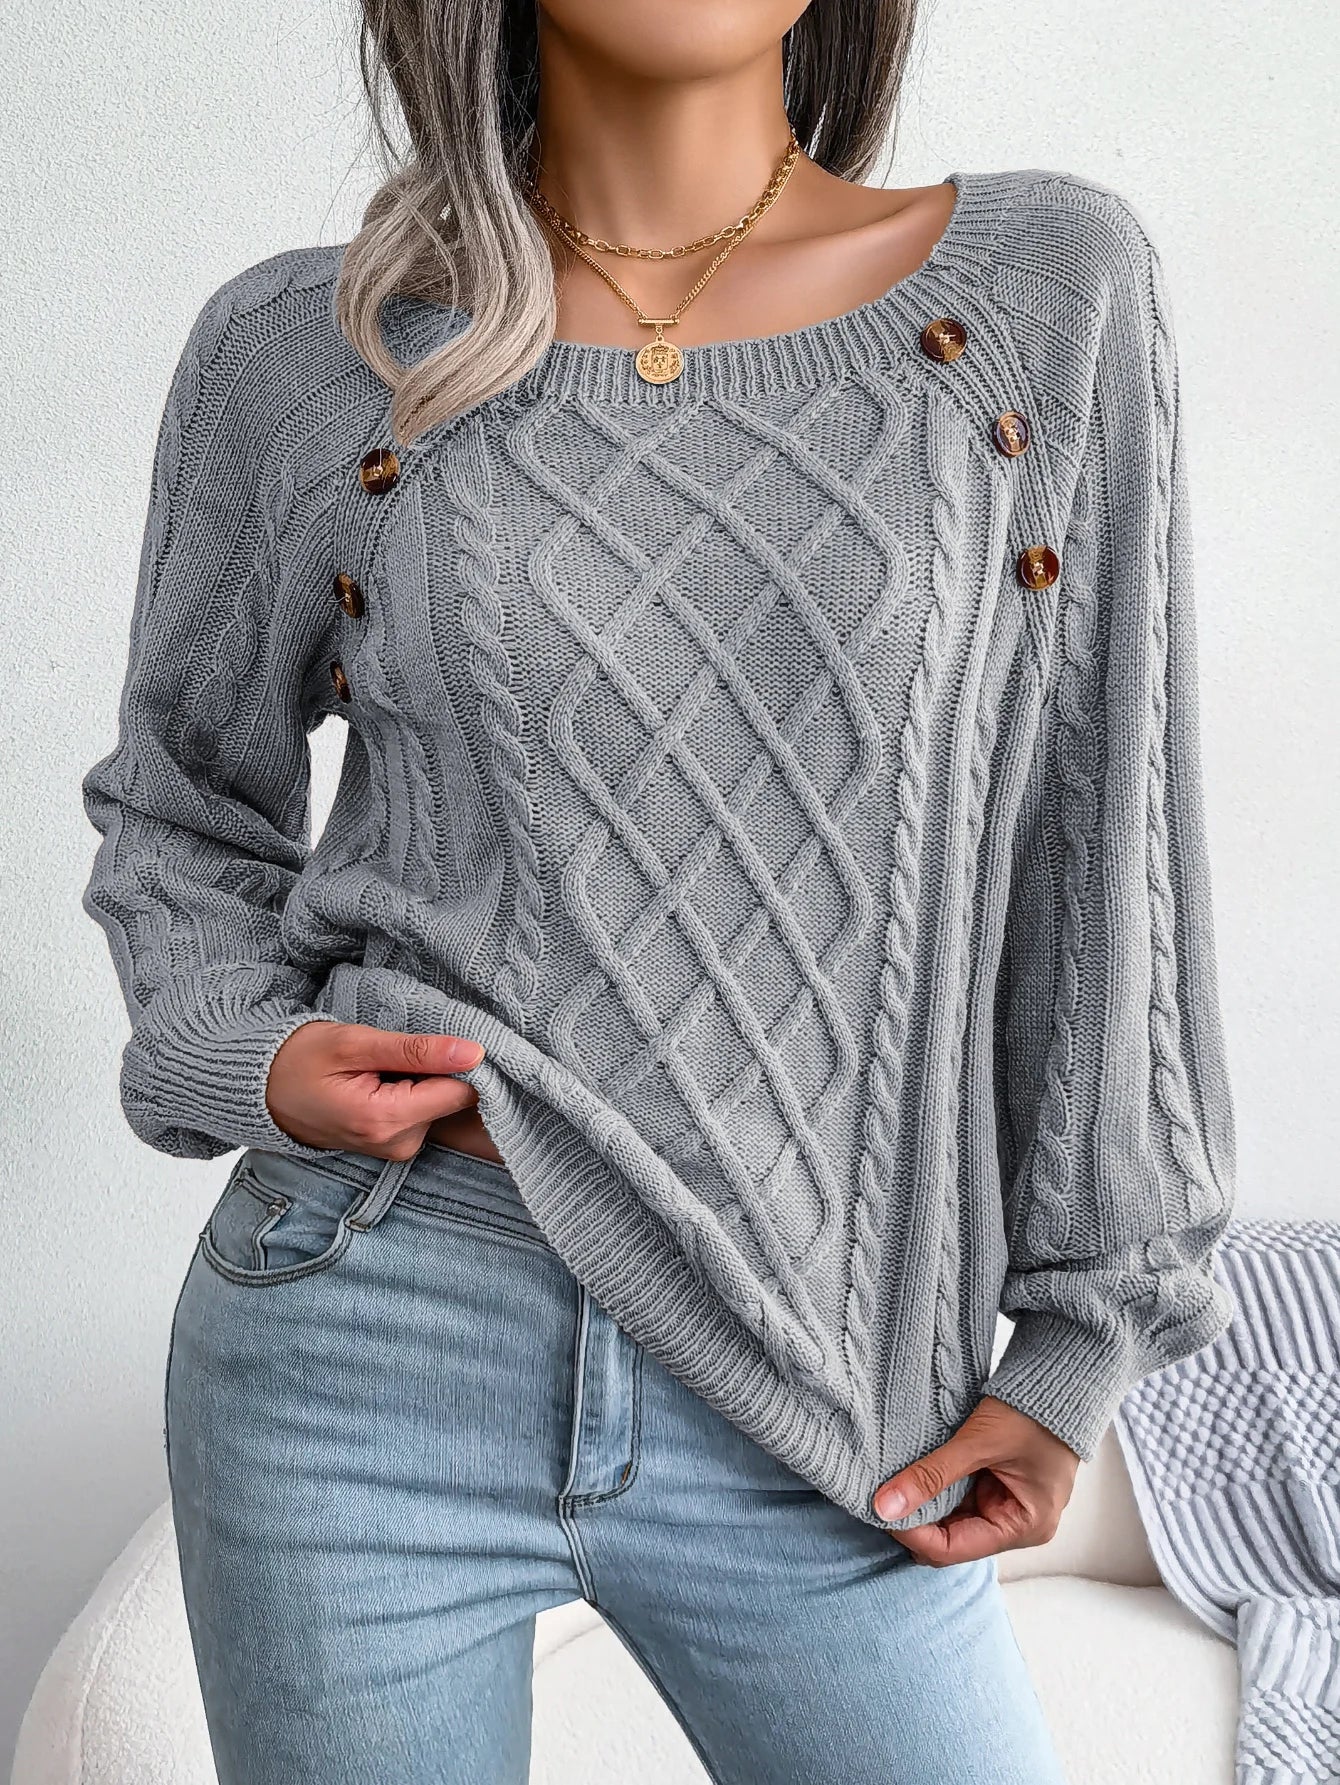 lovwvol Women Casual Square Collar Buttons Long Sleeve Knitted Pullovers And Sweaters For Autumn Winter